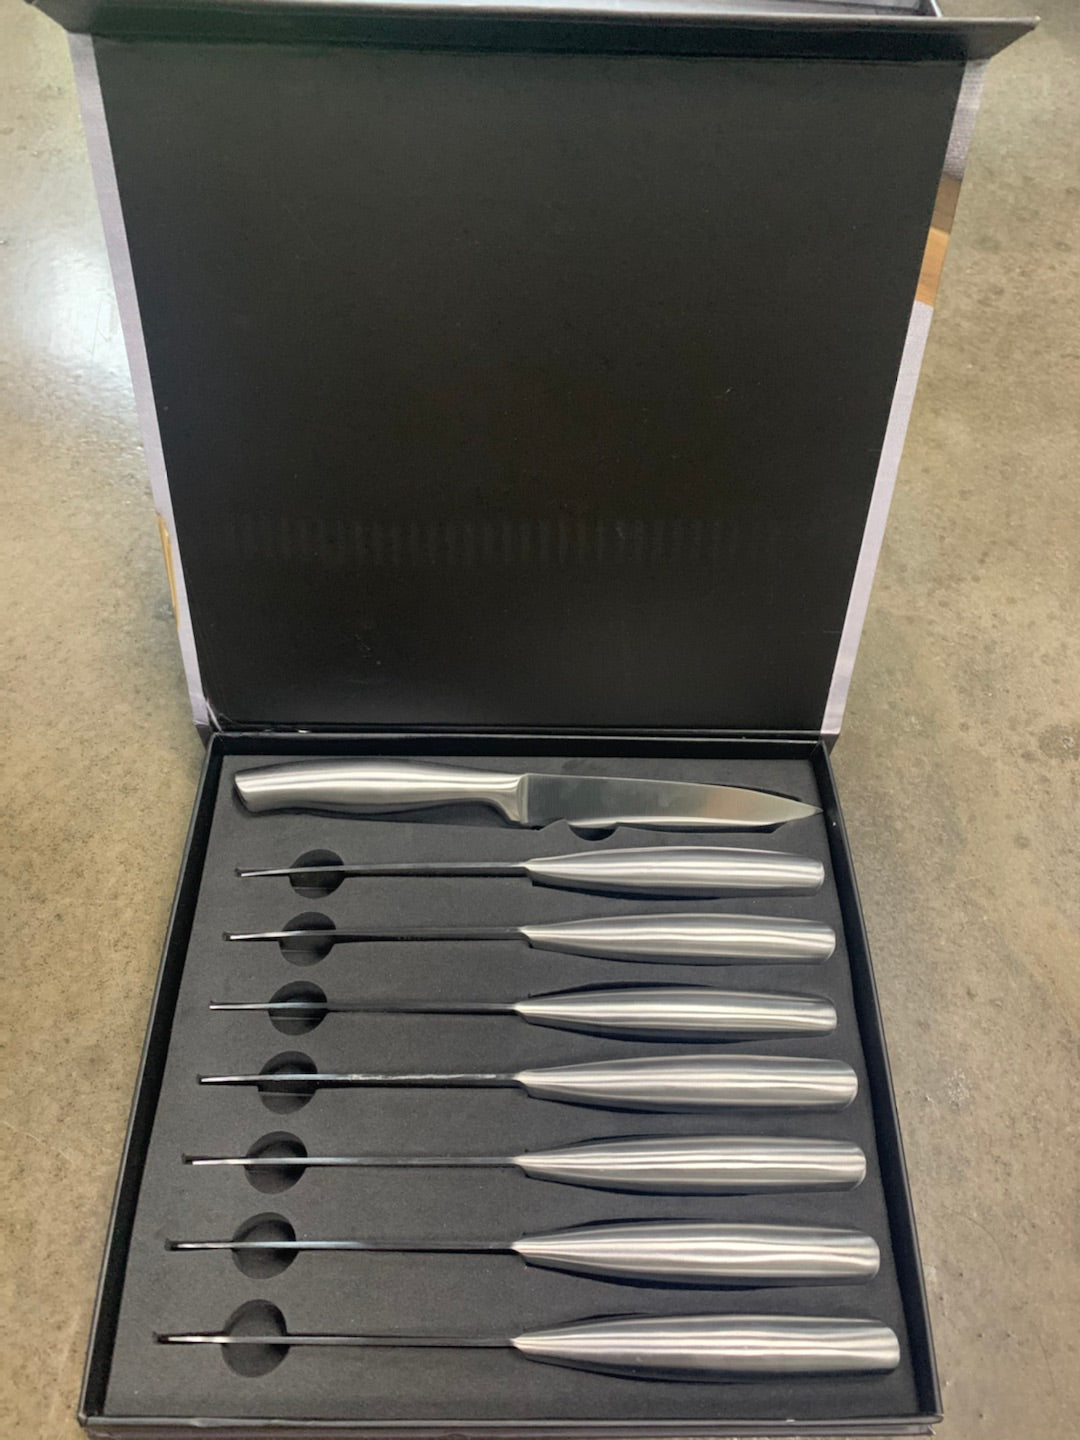 Caripeloy Steak Knife 8 Piece Premium Stainless Steel Steak Knife Kitchen Steak Knife Super Sharp Serrated Steak Knife with Gift Box, Silver